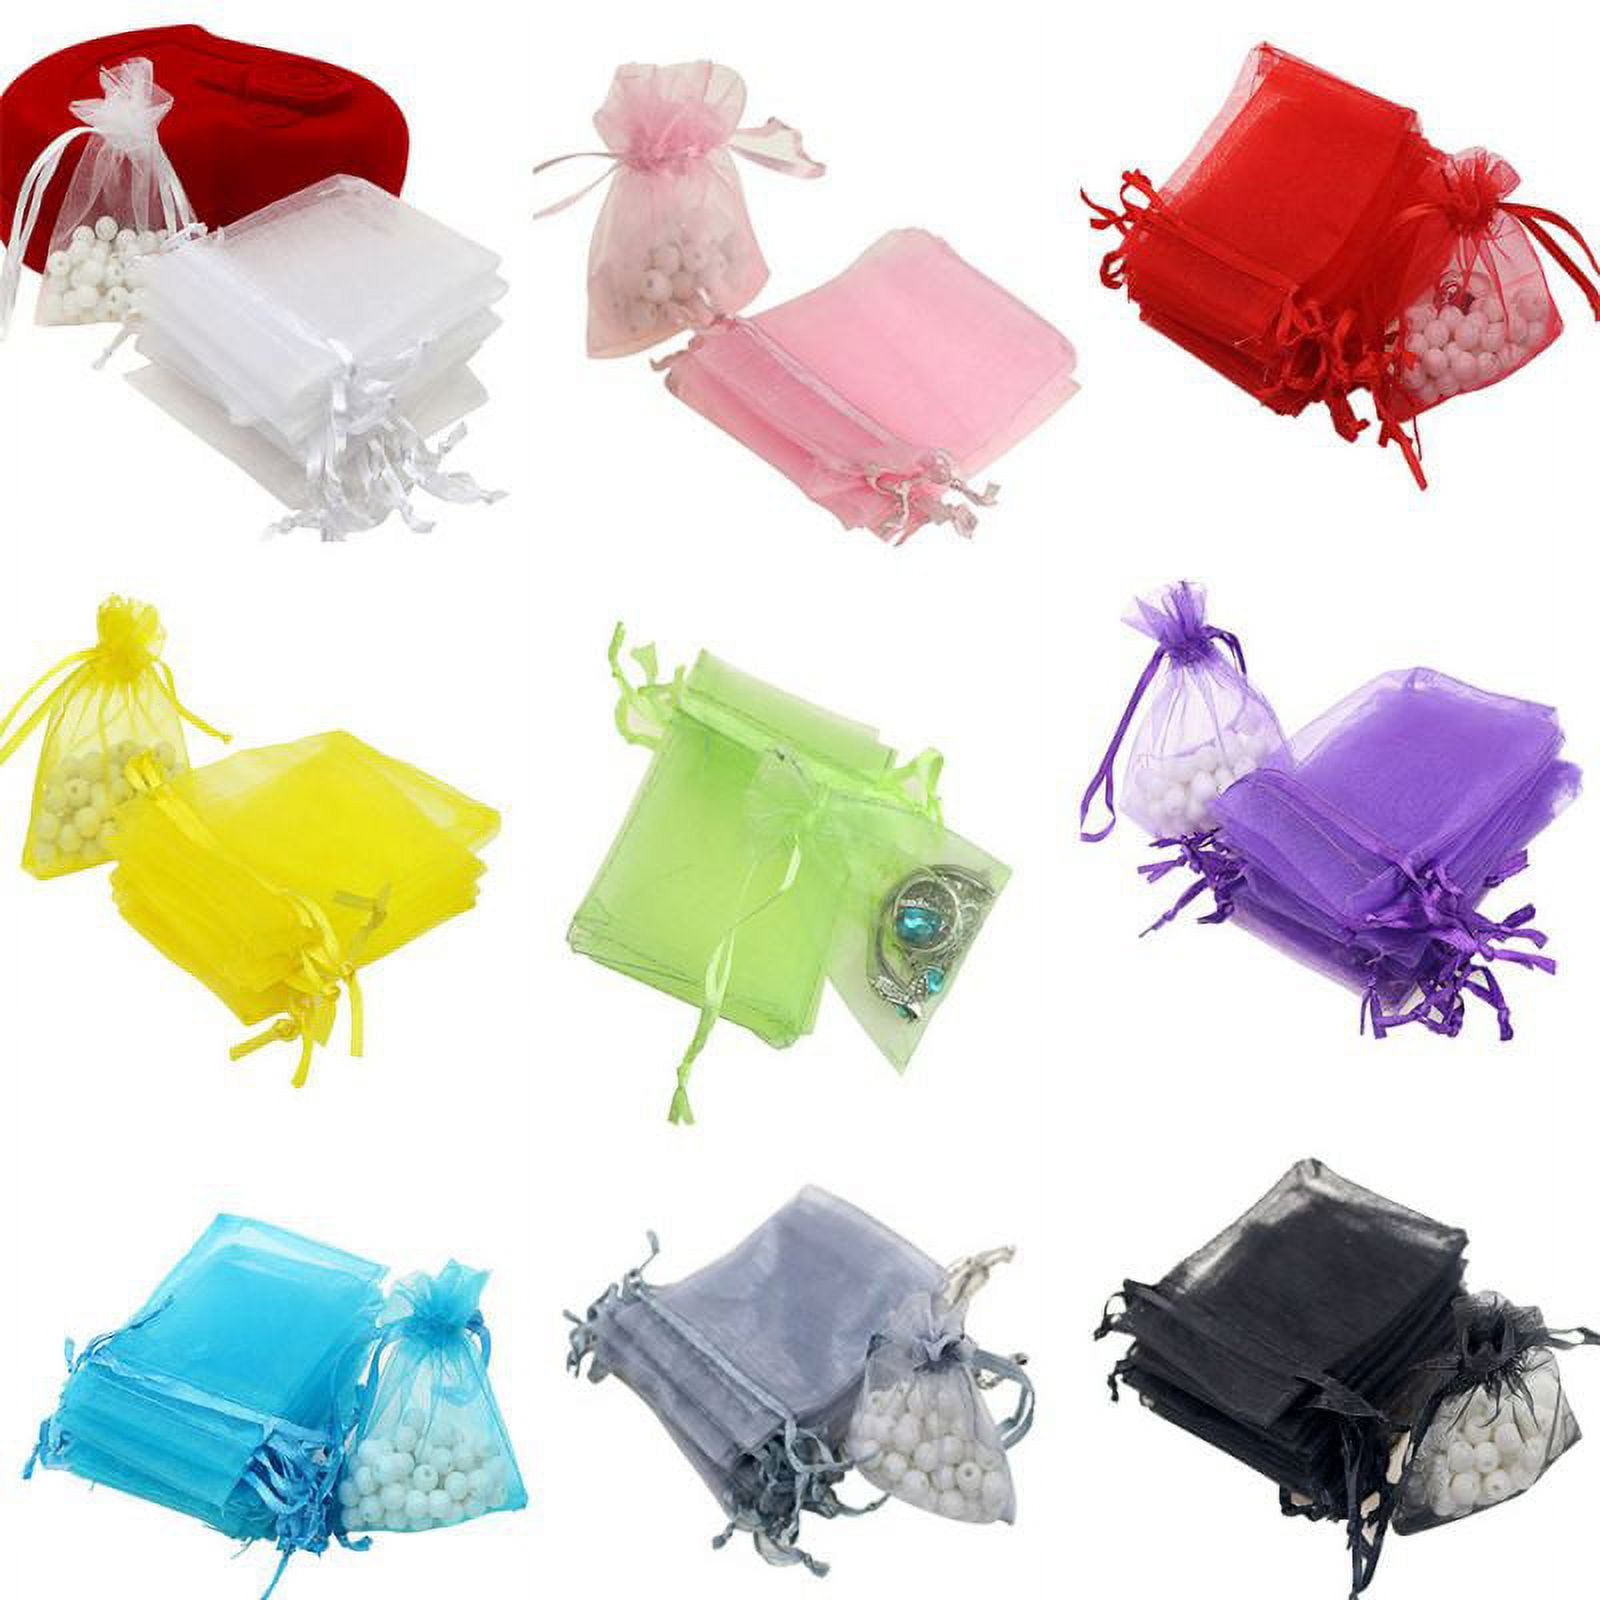 200/100/5Pcs Organza Bags,Moon Star Jewelry Pouch Gift Packaging Bag Candy  Bag Mixed Color with Drawstring for Wedding Party Favors Christmas  Decorations